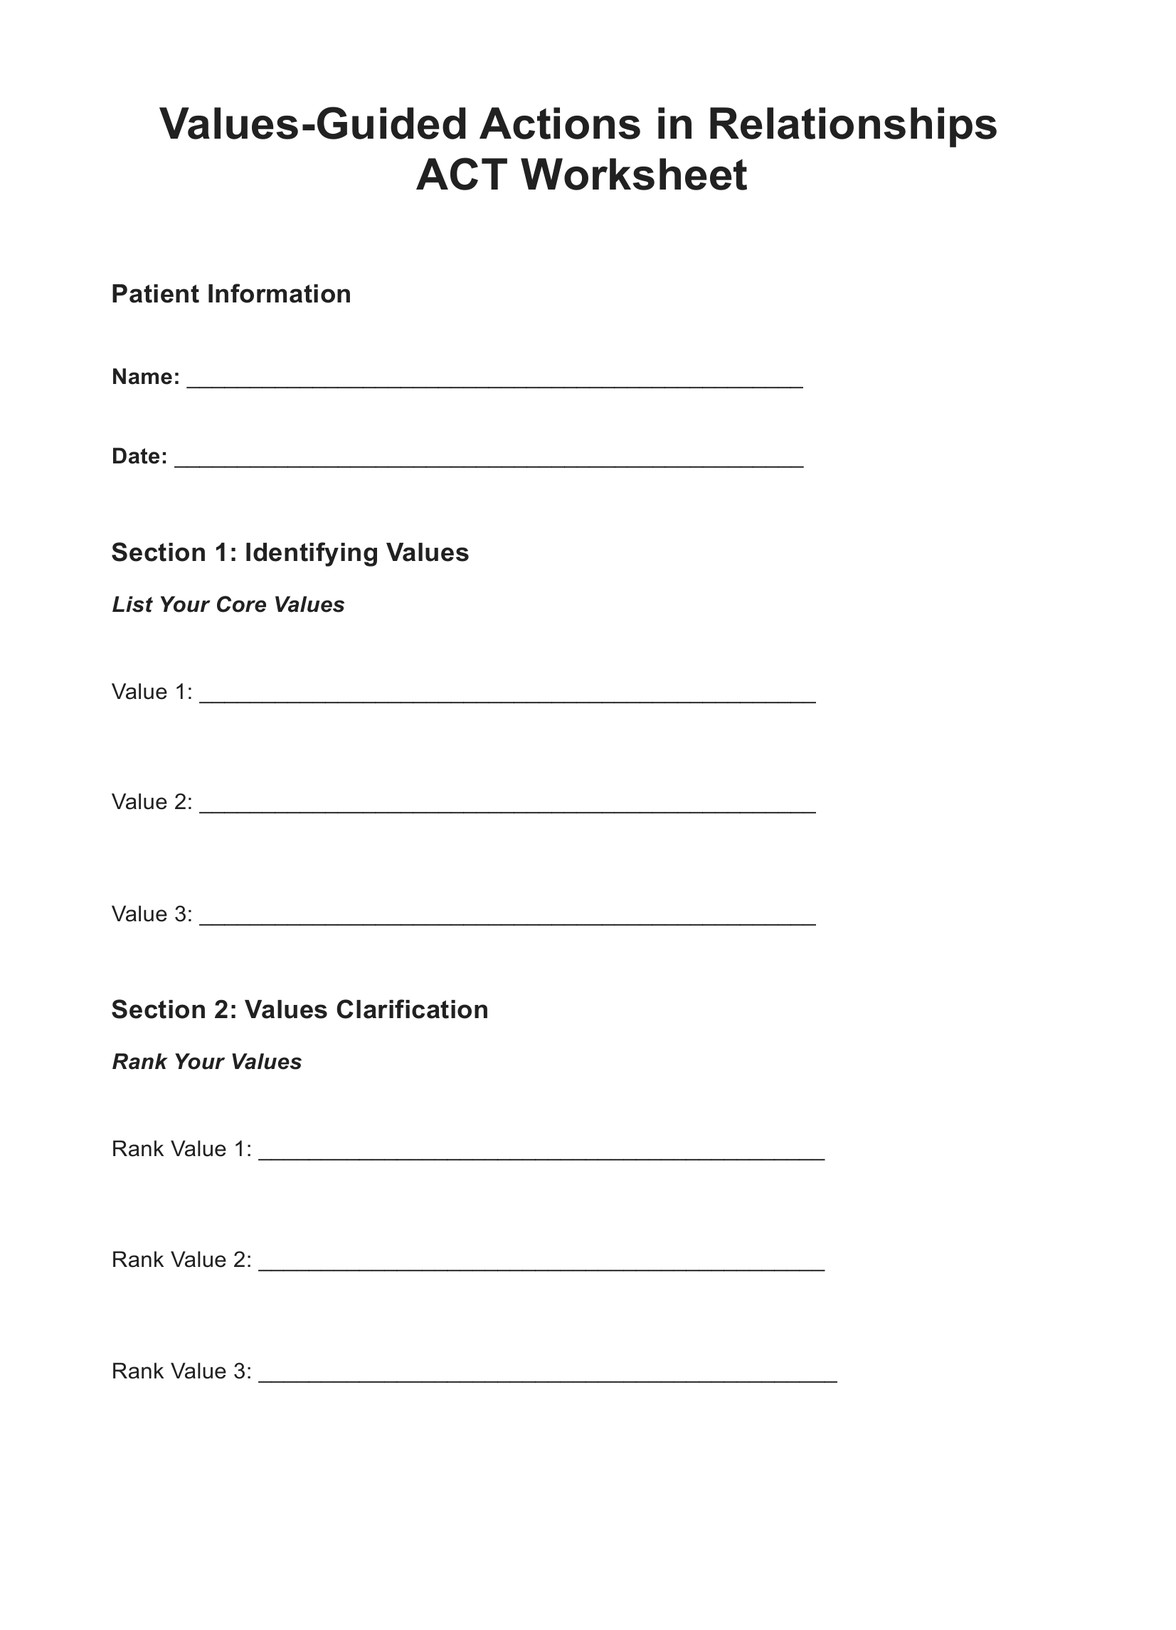 Values-Guided Actions in Relationships ACT Worksheet PDF Example